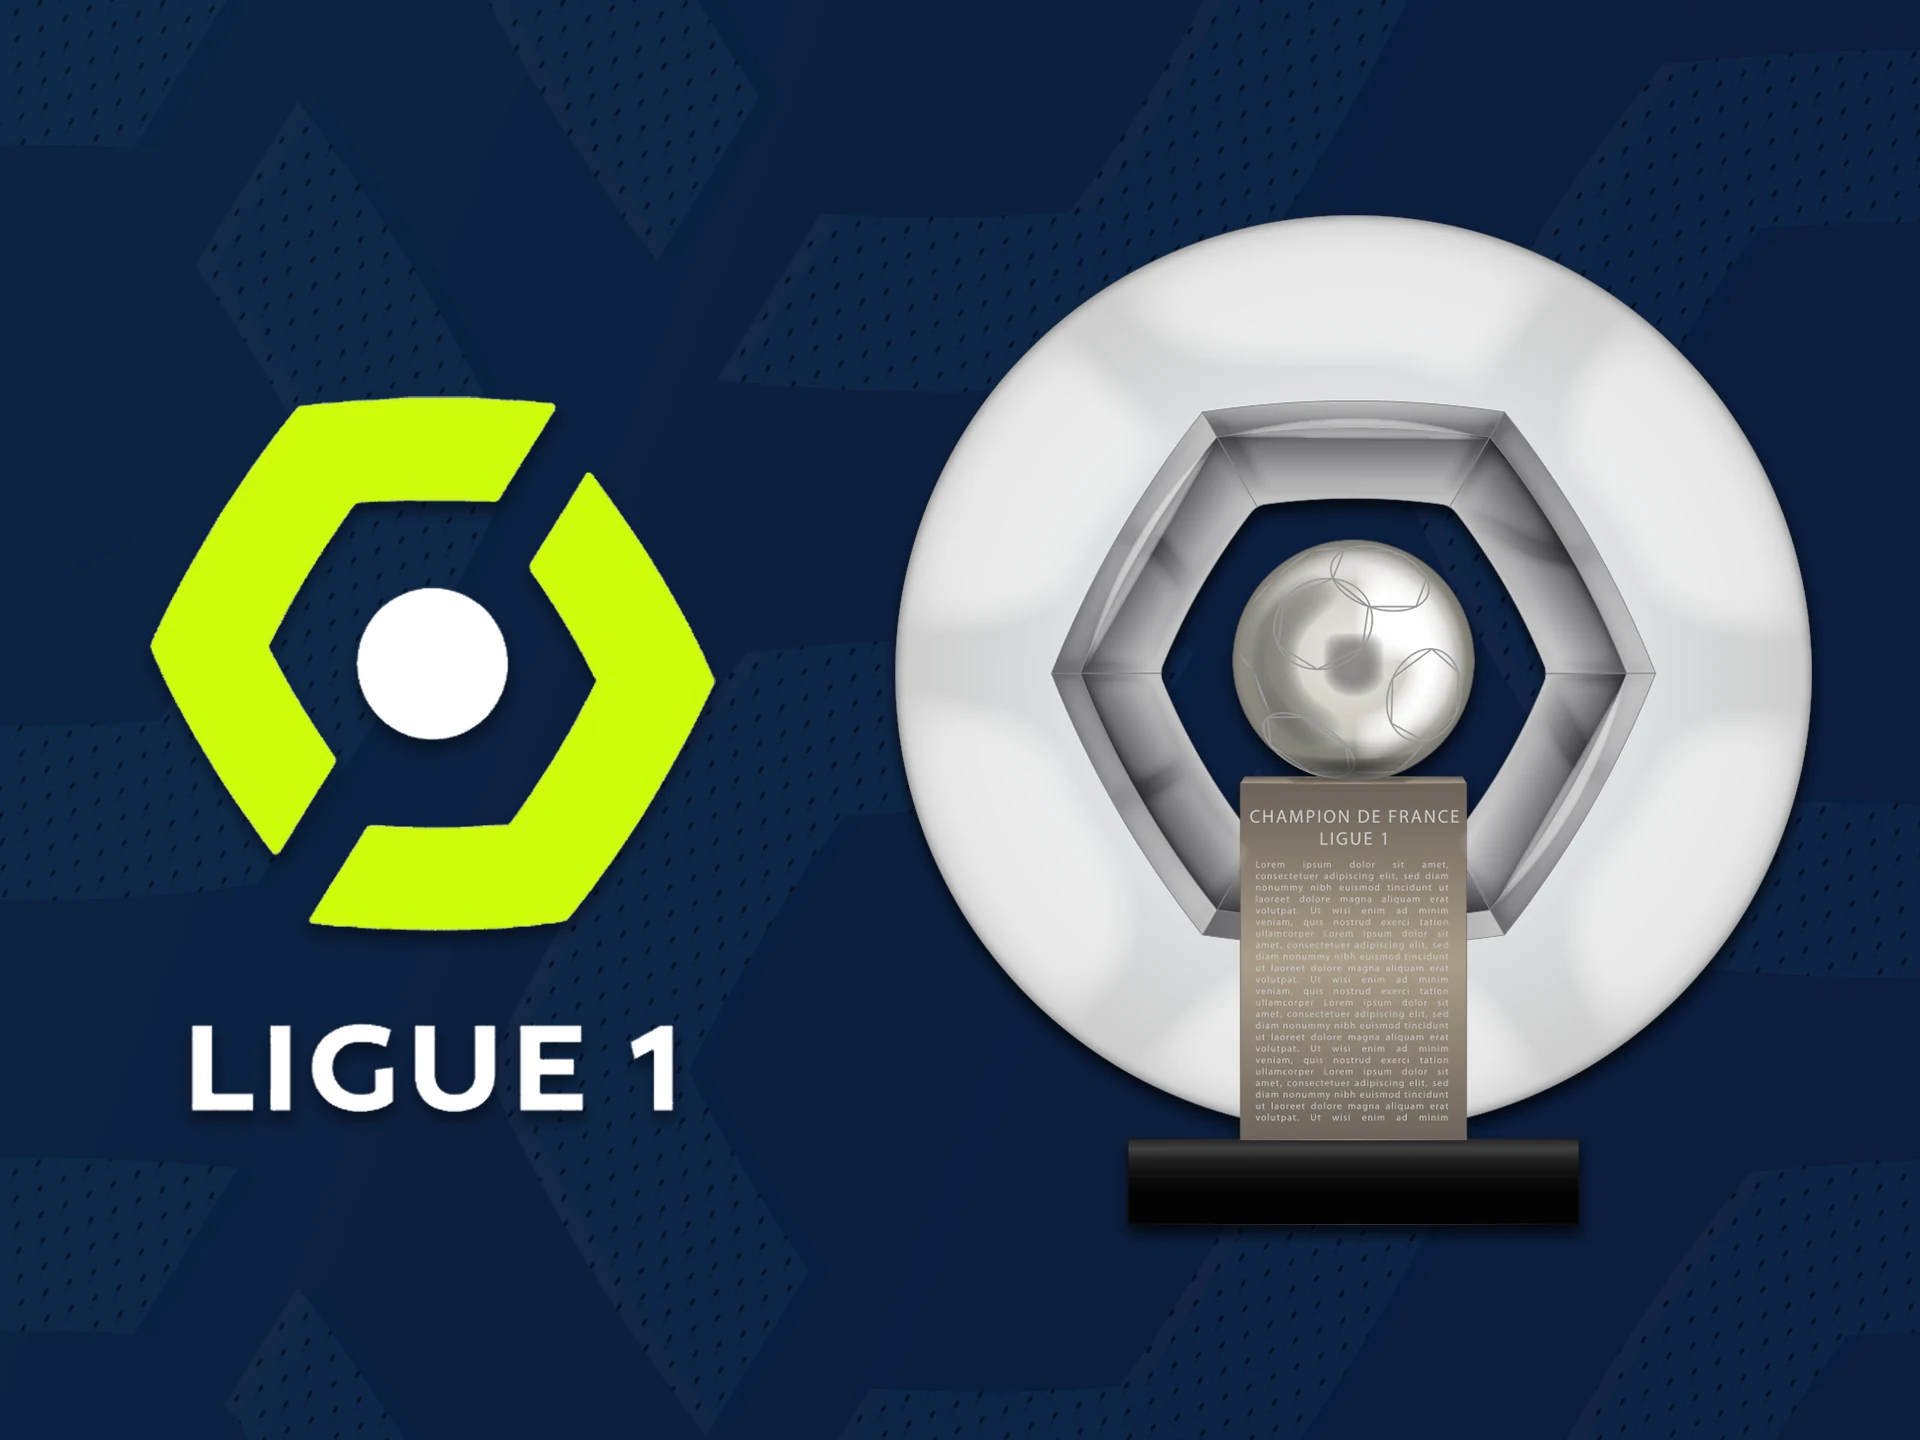 Exciting football betting guarantees a Ligue 1 tournament.